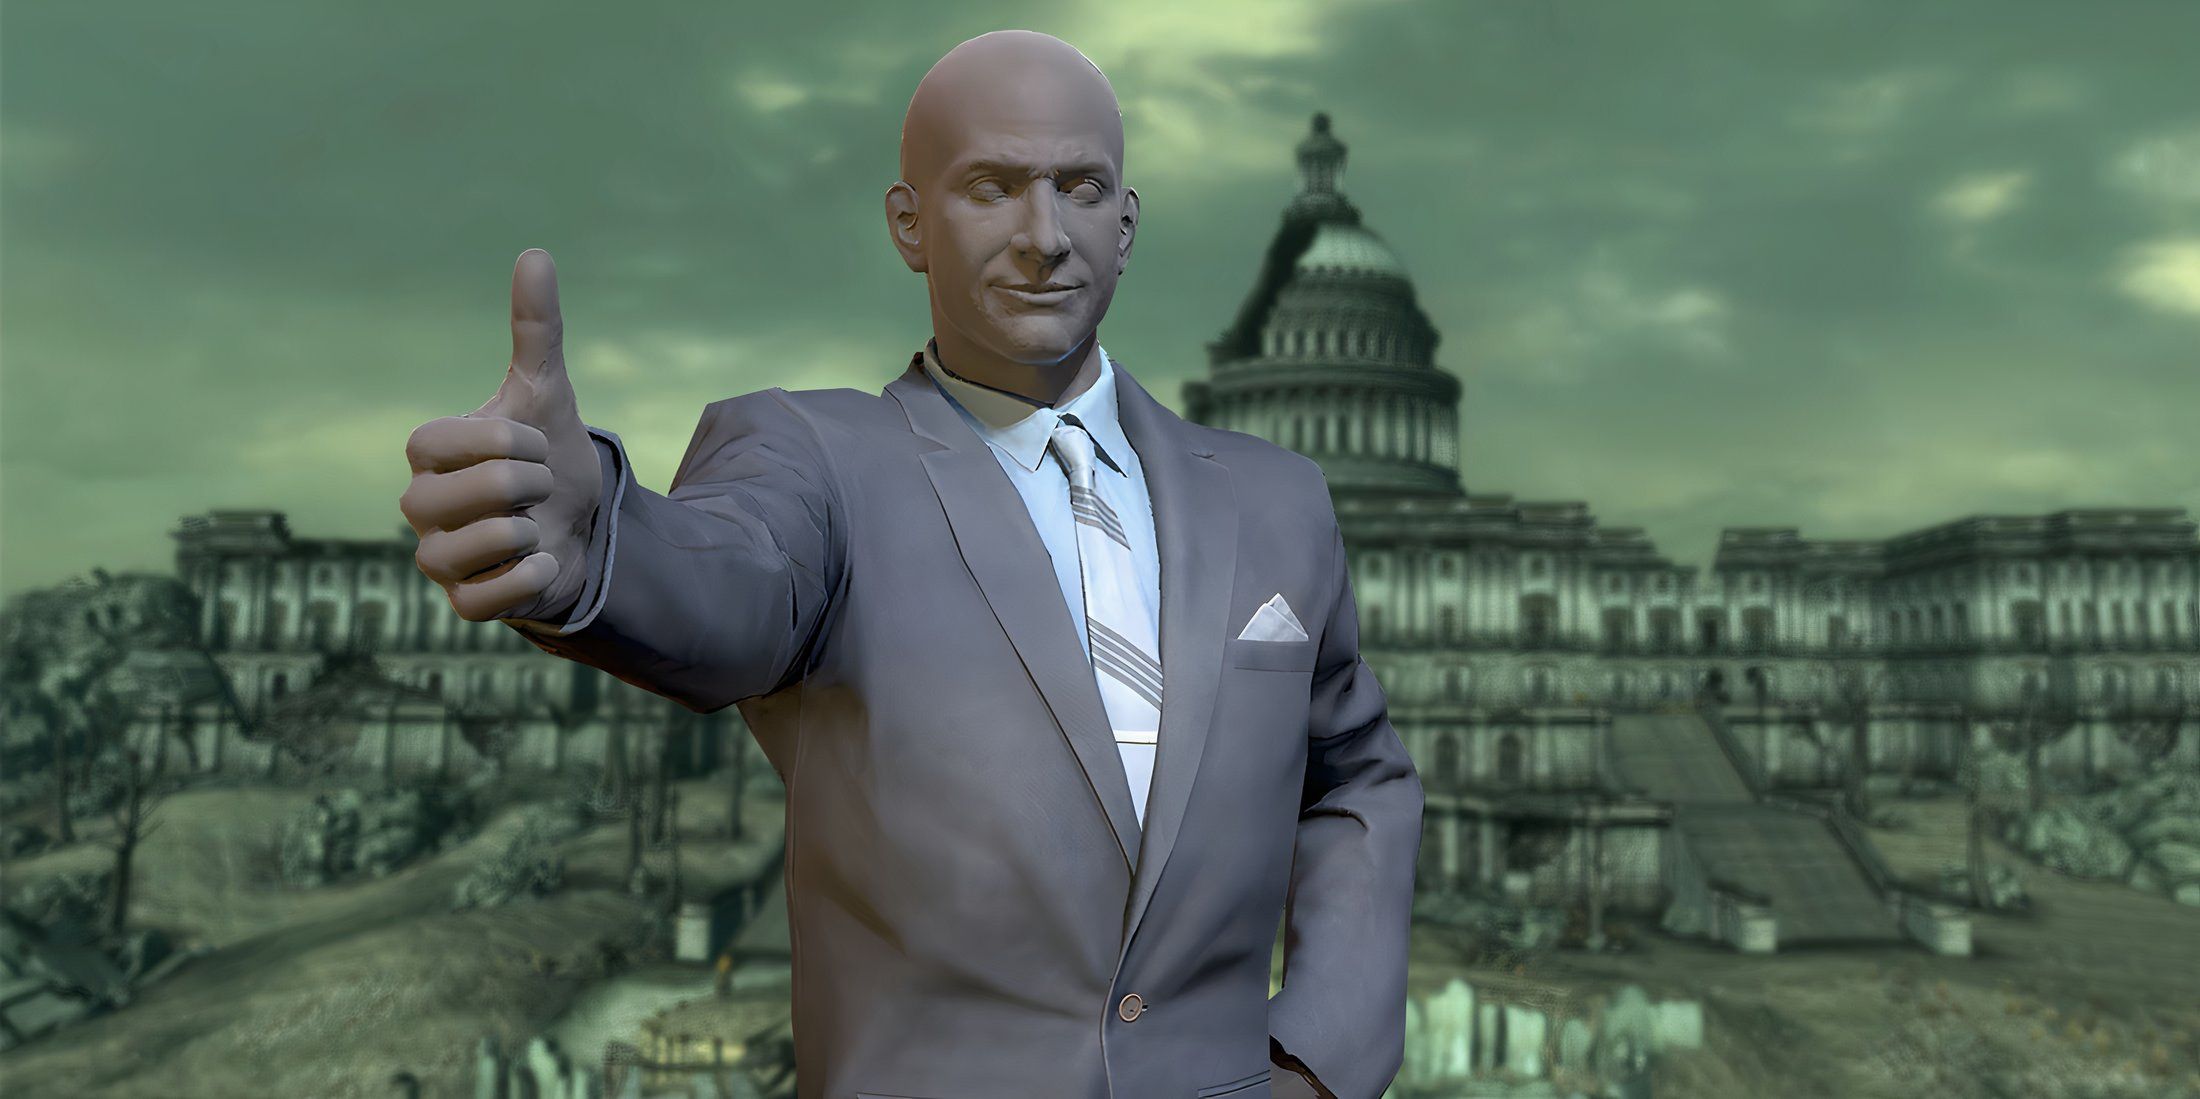 fallout-76-how-to-get-presidential-power-suit